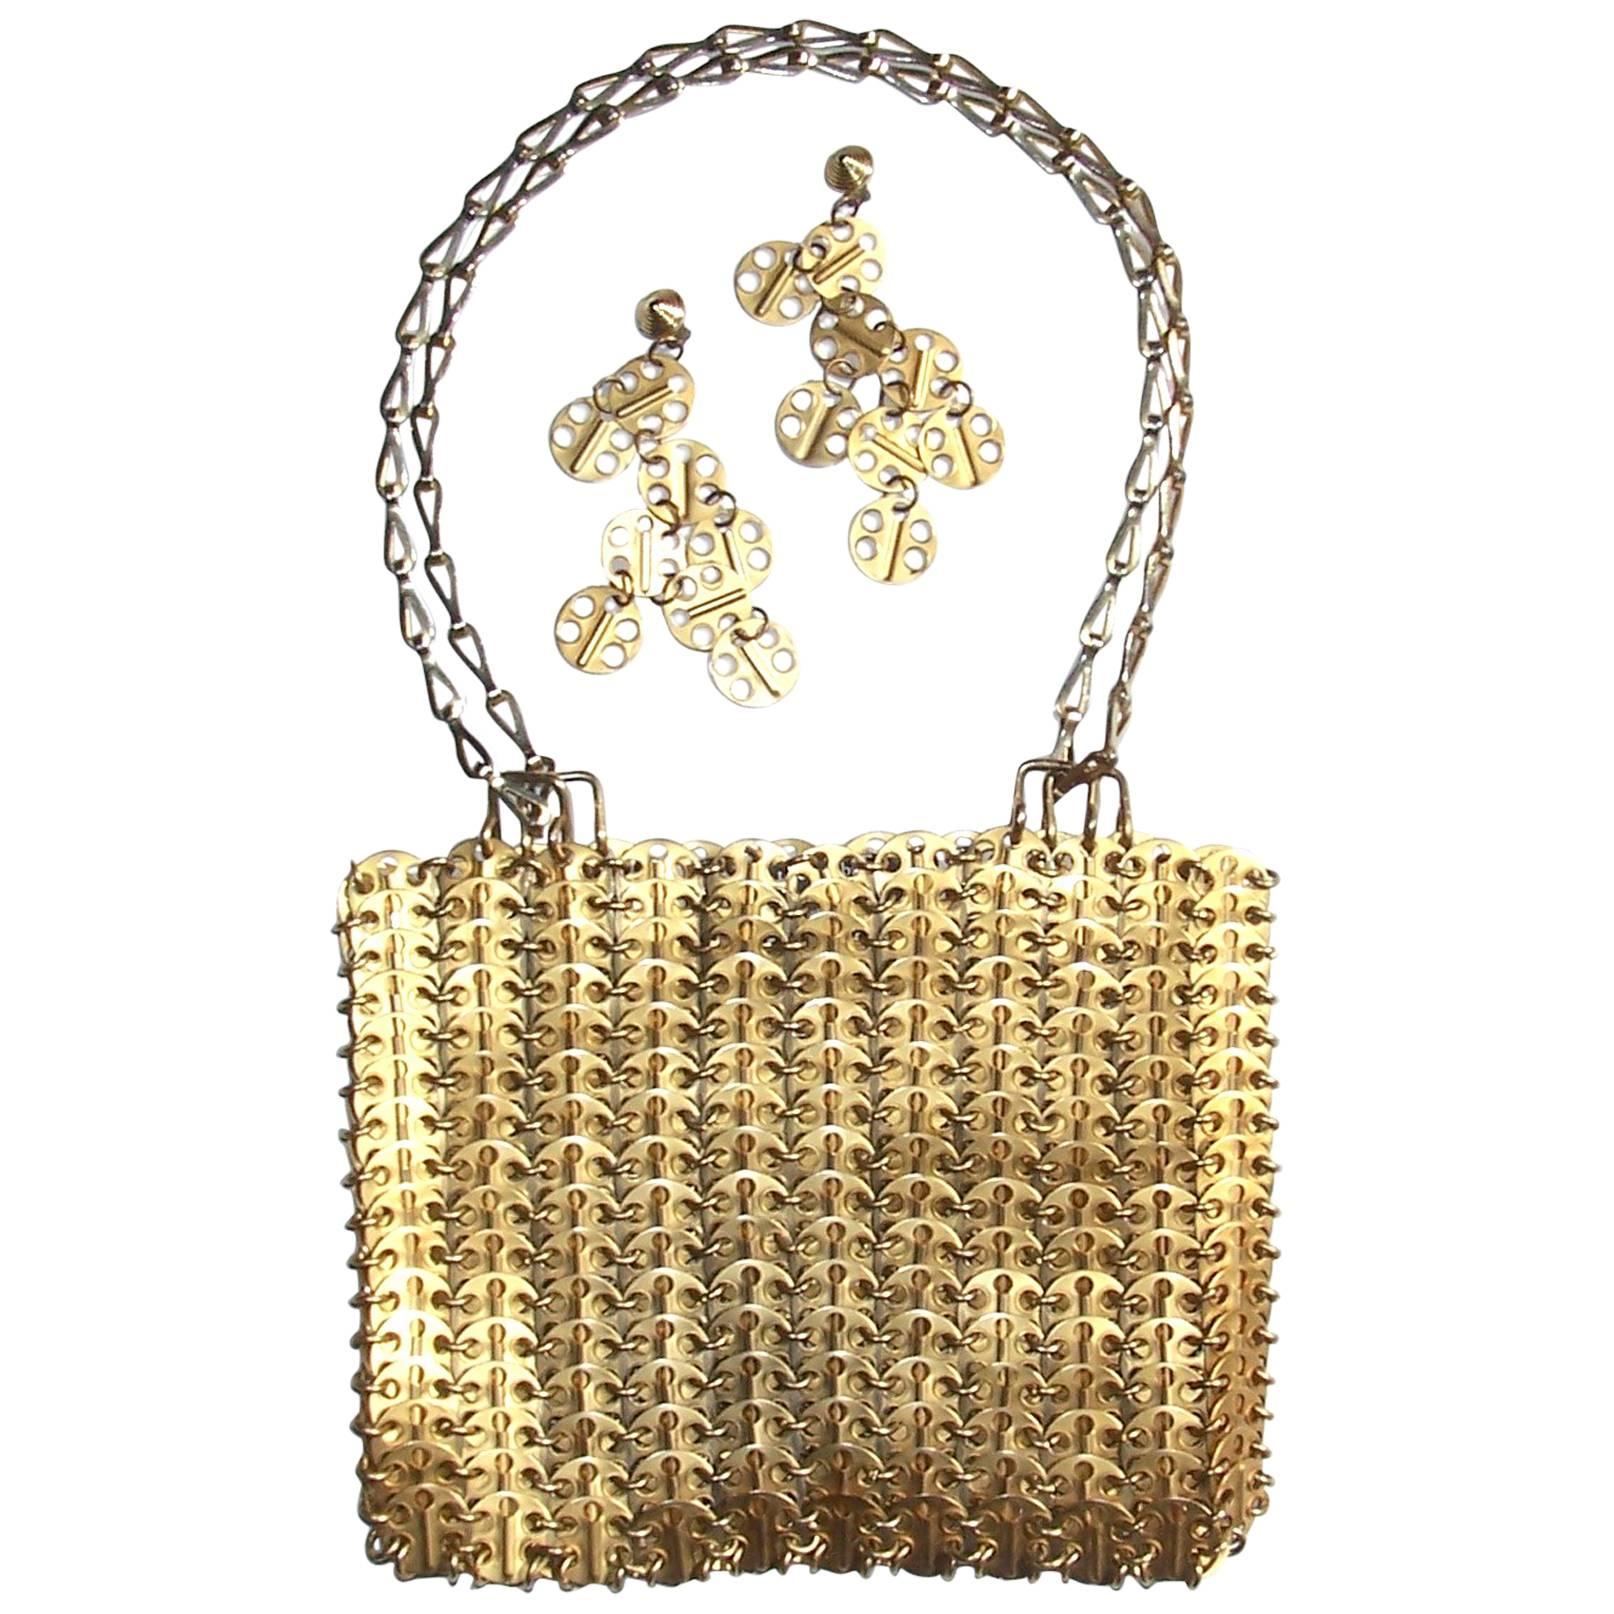 Iconic 1960's Paco Rabanne Space Age Gold Chain Mail Handbag & Earrings